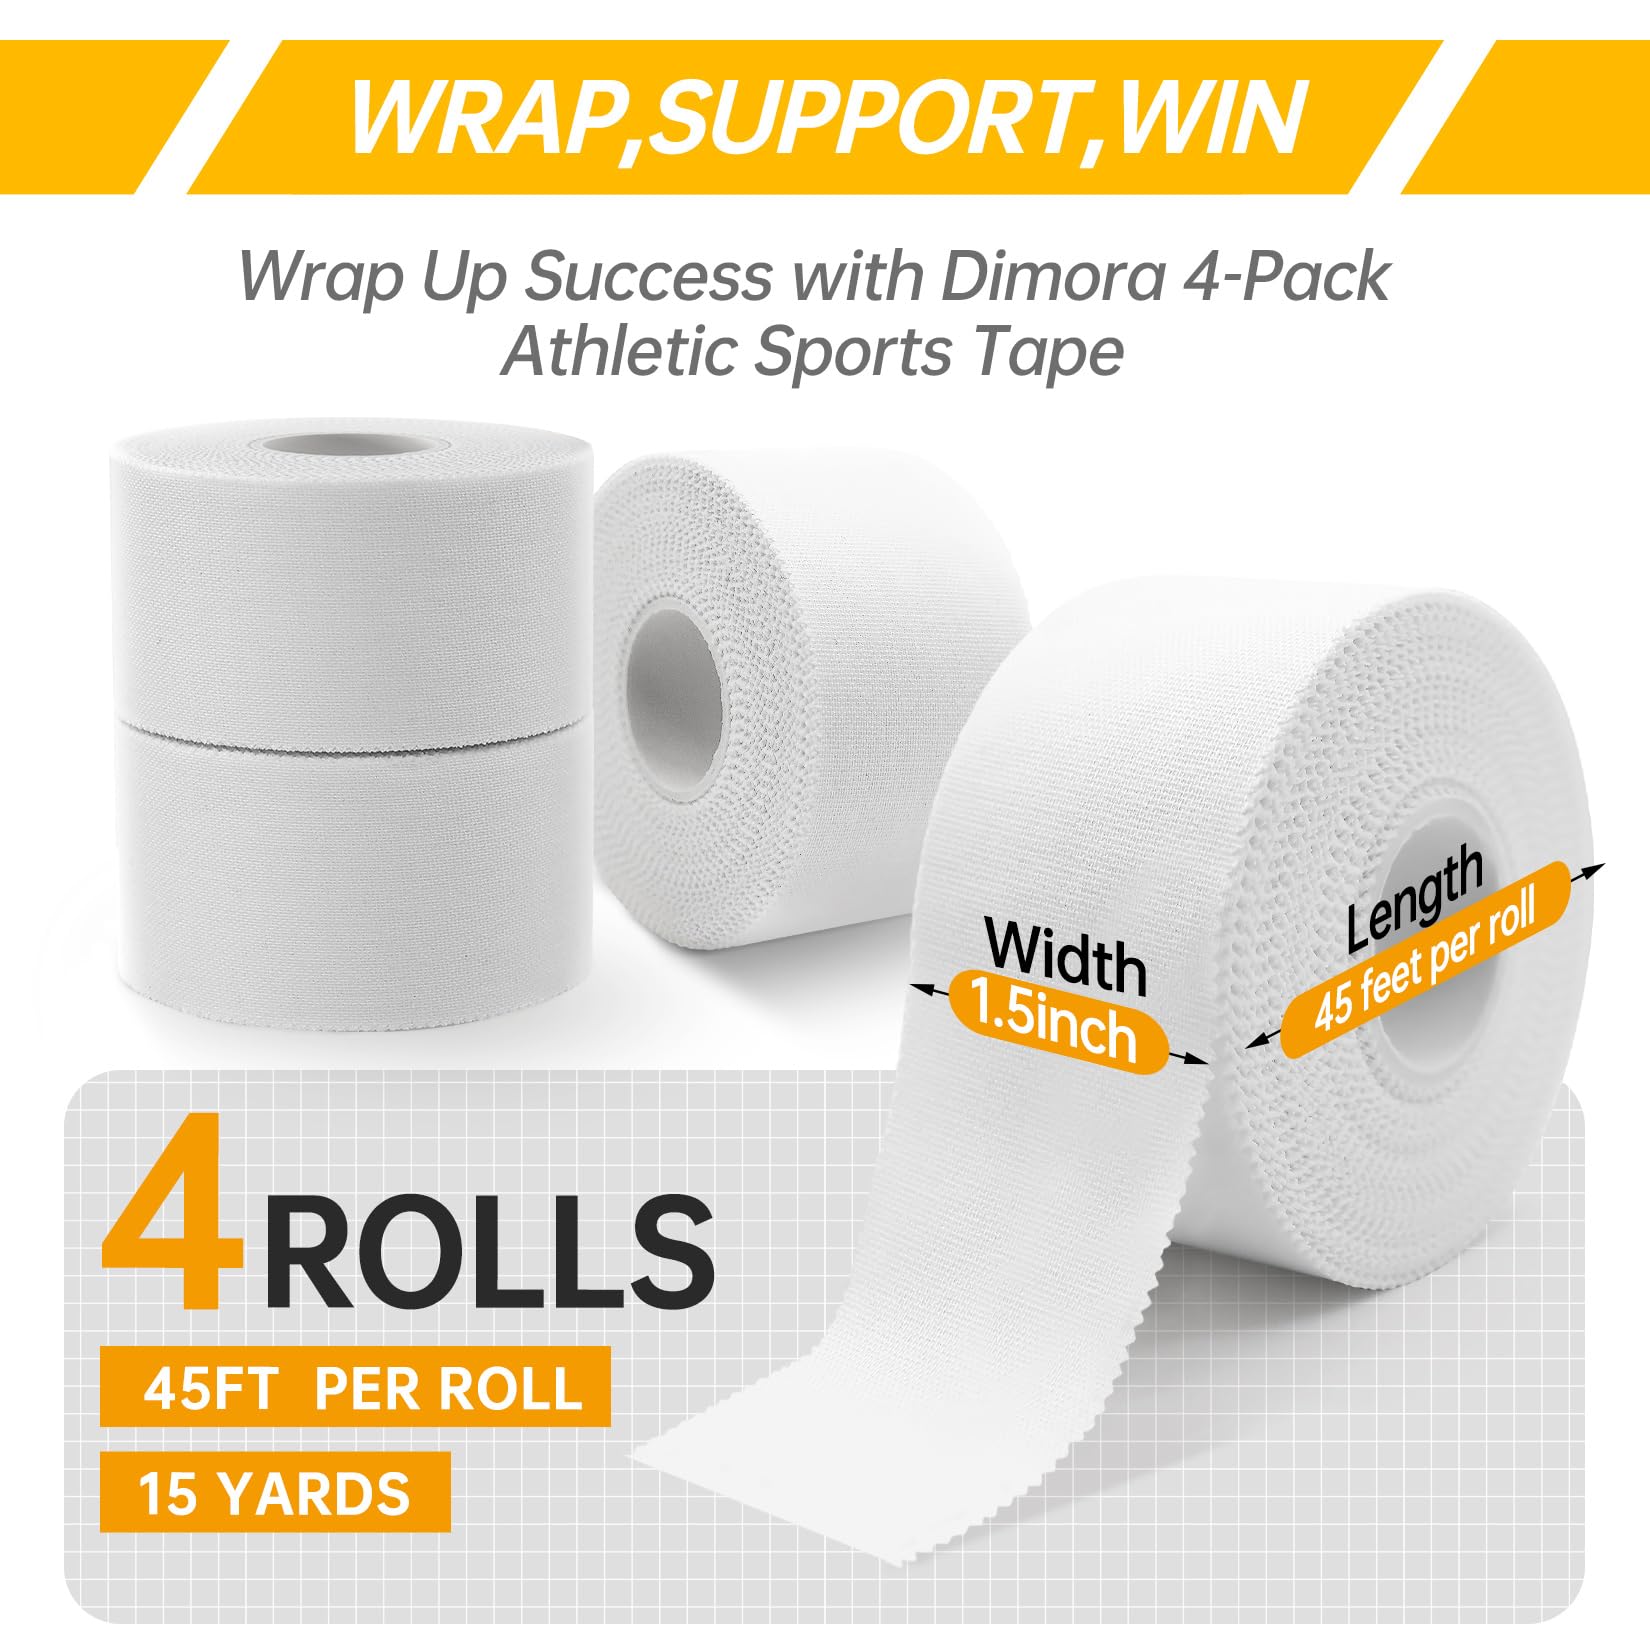 Dimora White Athletic Tape 4-Pack - 60 Yards Strong Adhesive Sports Tape in Total, NO Sticky Residue Easy Tear, Best Sport Tape for Athletes & Fitness Enthusiasts of All Levels (1.5in X 45ft Roll)